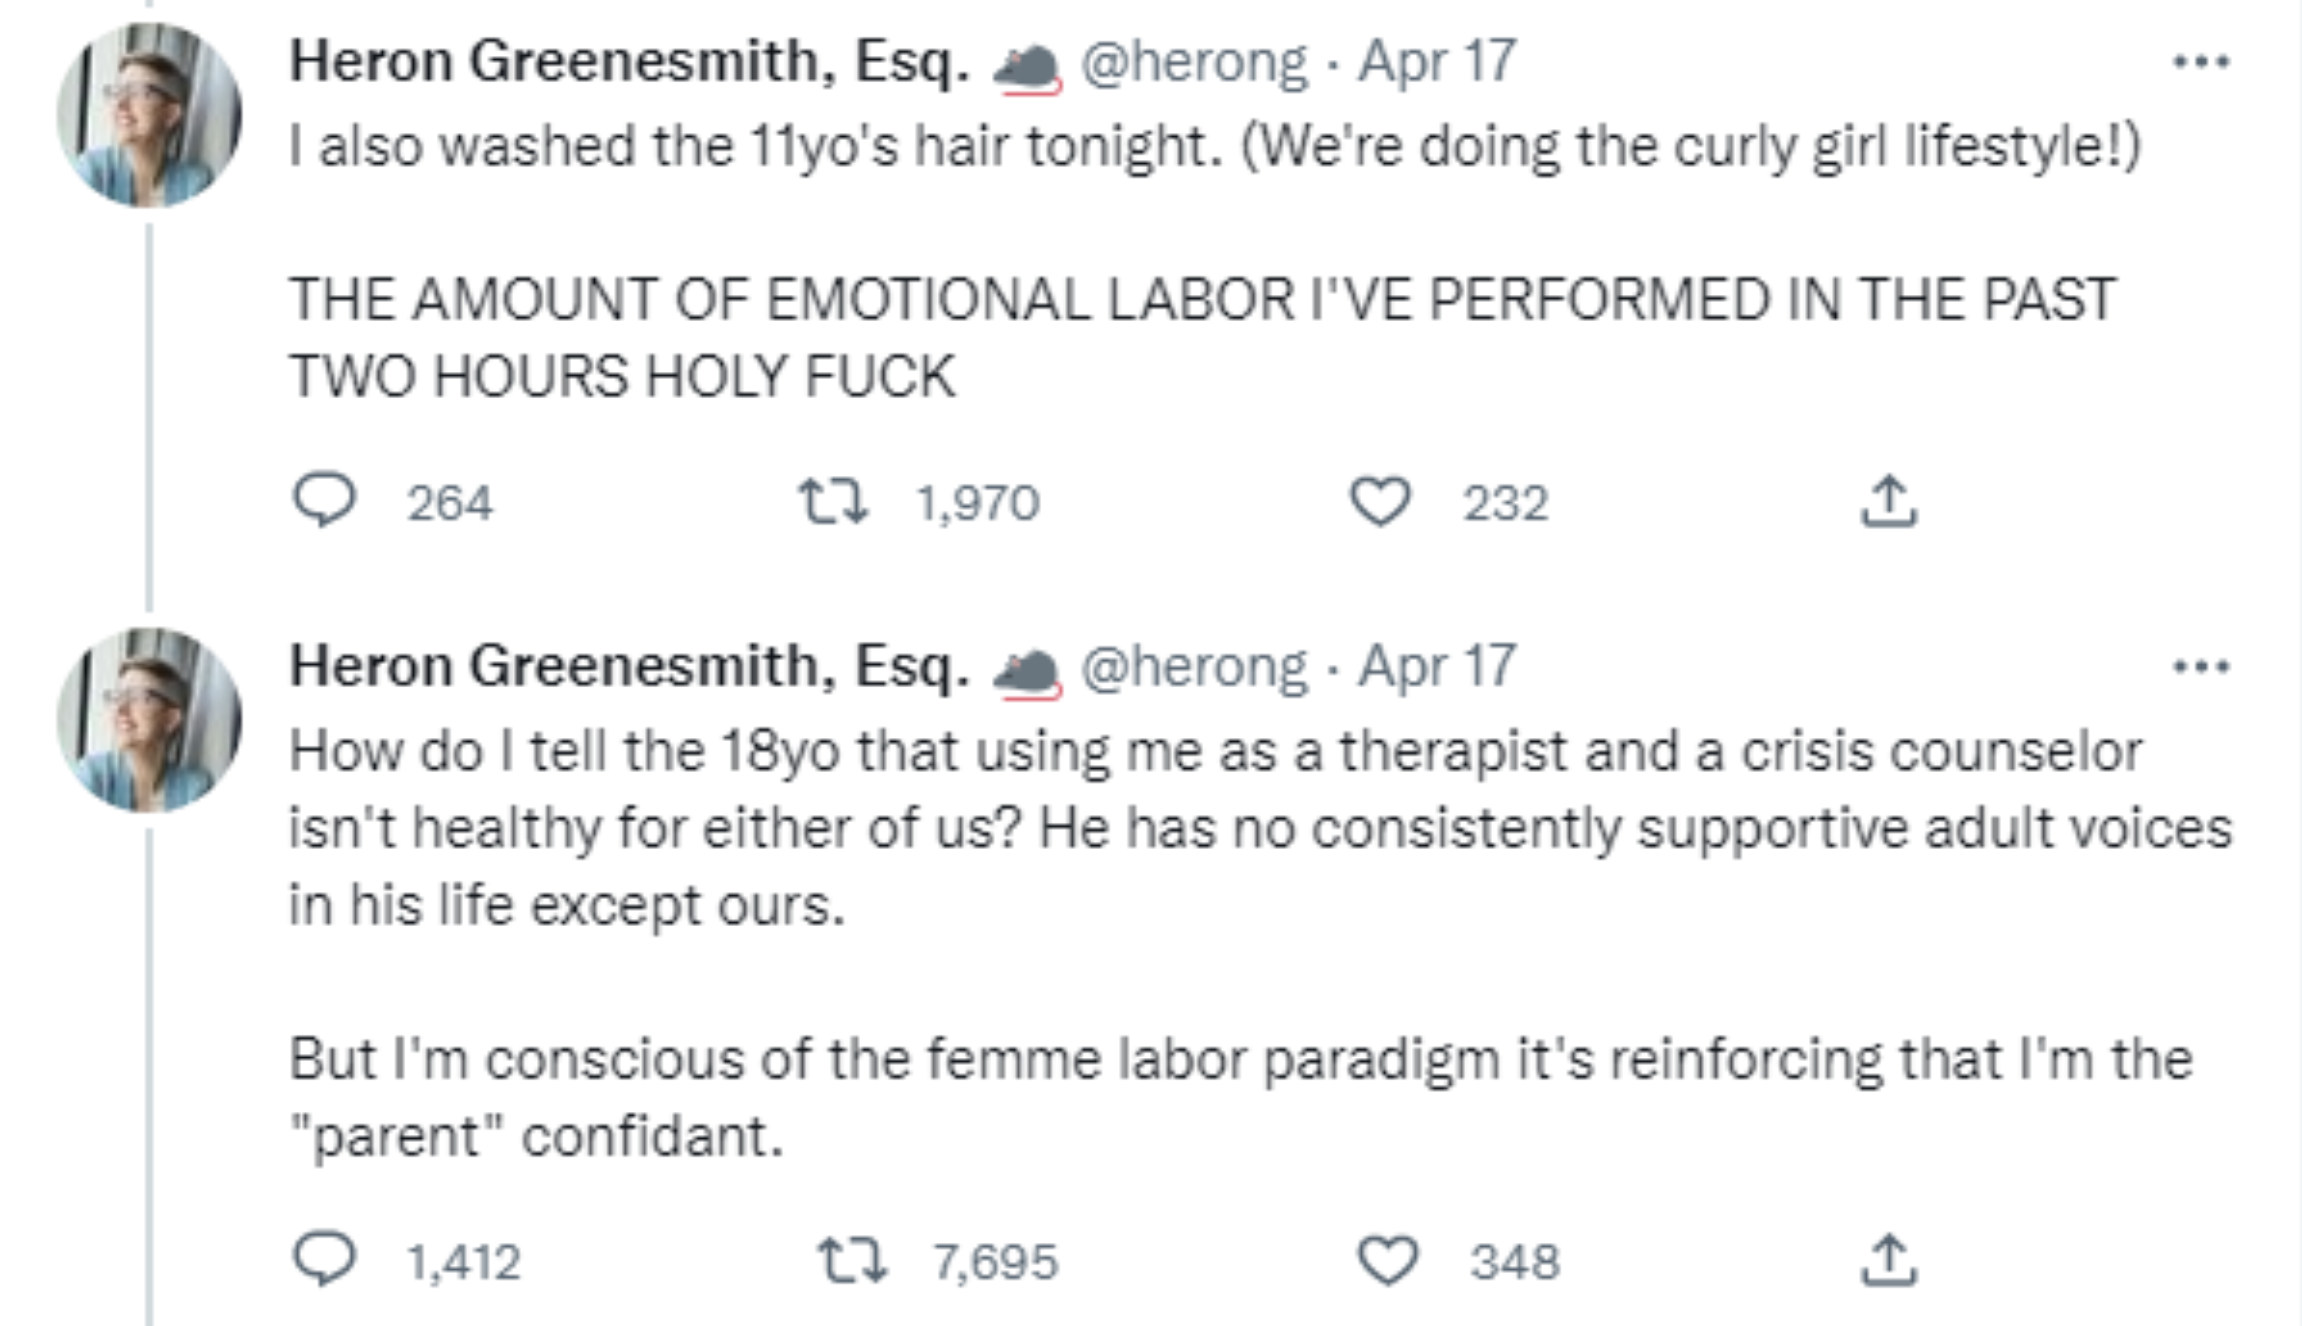 twitter hot takes 2022 - document - Heron Greenesmith, Esq. Apr 17 I also washed the 11yo's hair tonight. We're doing the curly girl lifestyle! The Amount Of Emotional Labor I'Ve Performed In The Past Two Hours Holy Fuck 13 1,970 264 232 Heron Greenesmith